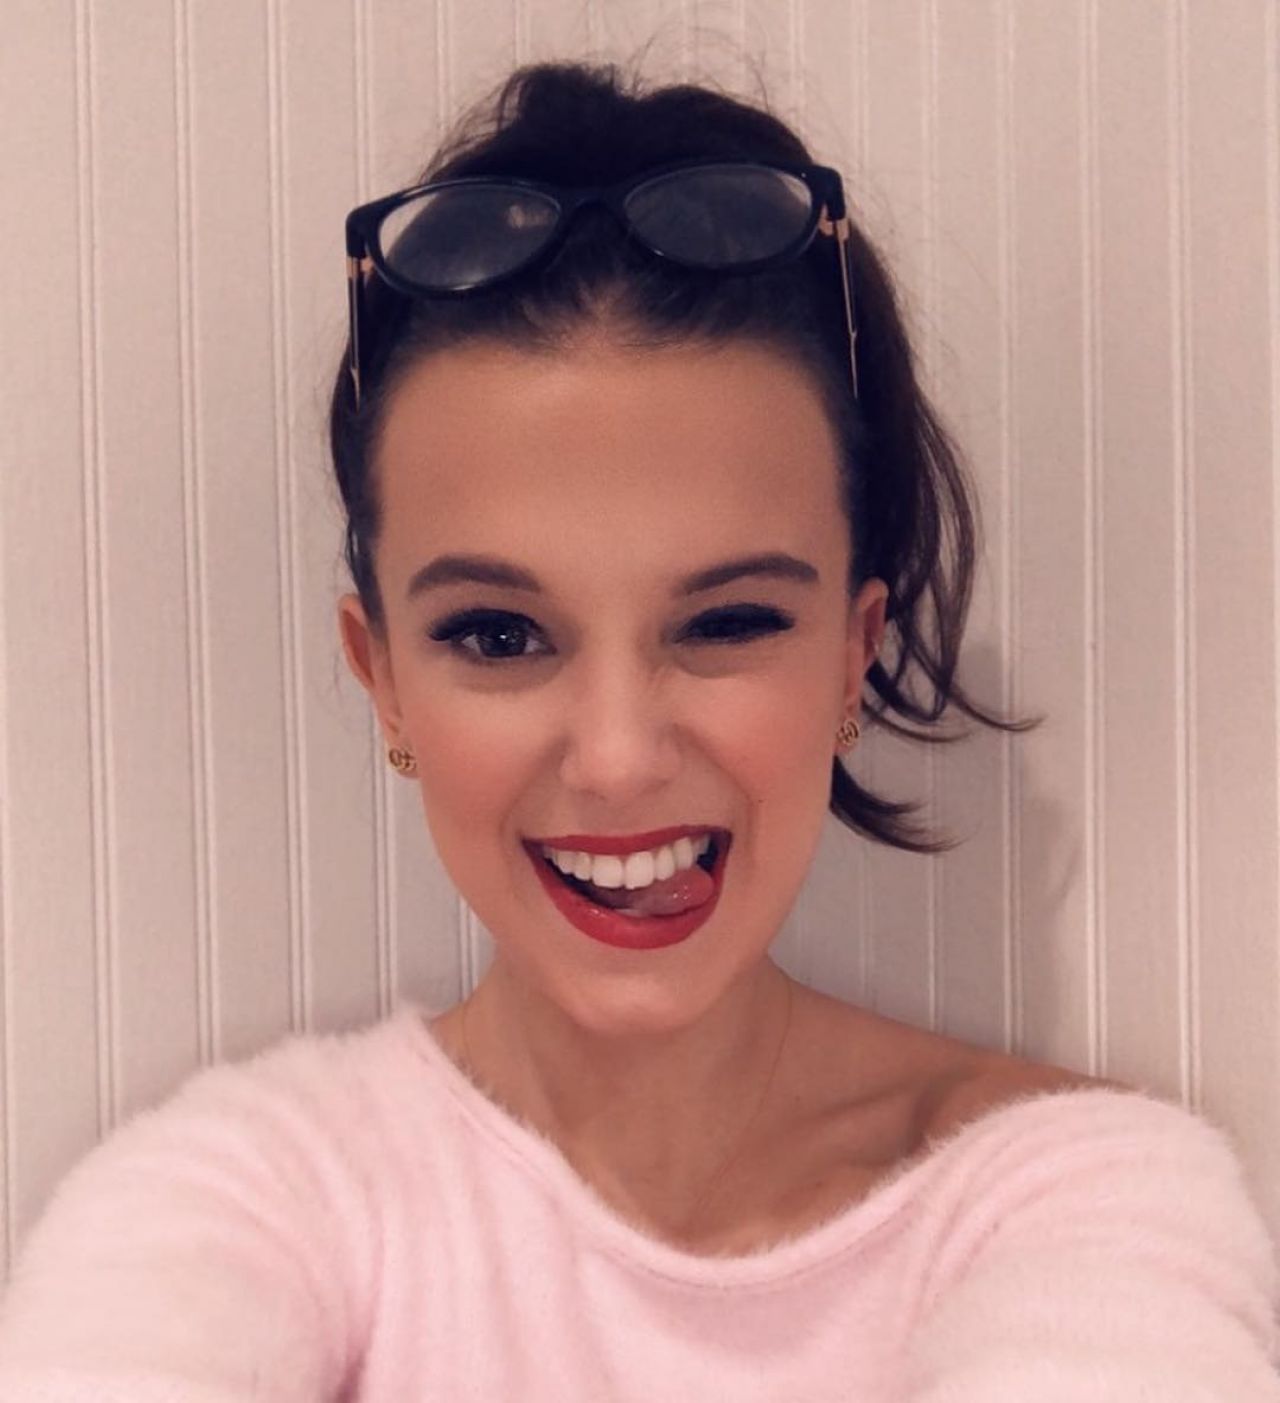 Millie Bobby Brown - Personal Pics 02/17/2019.